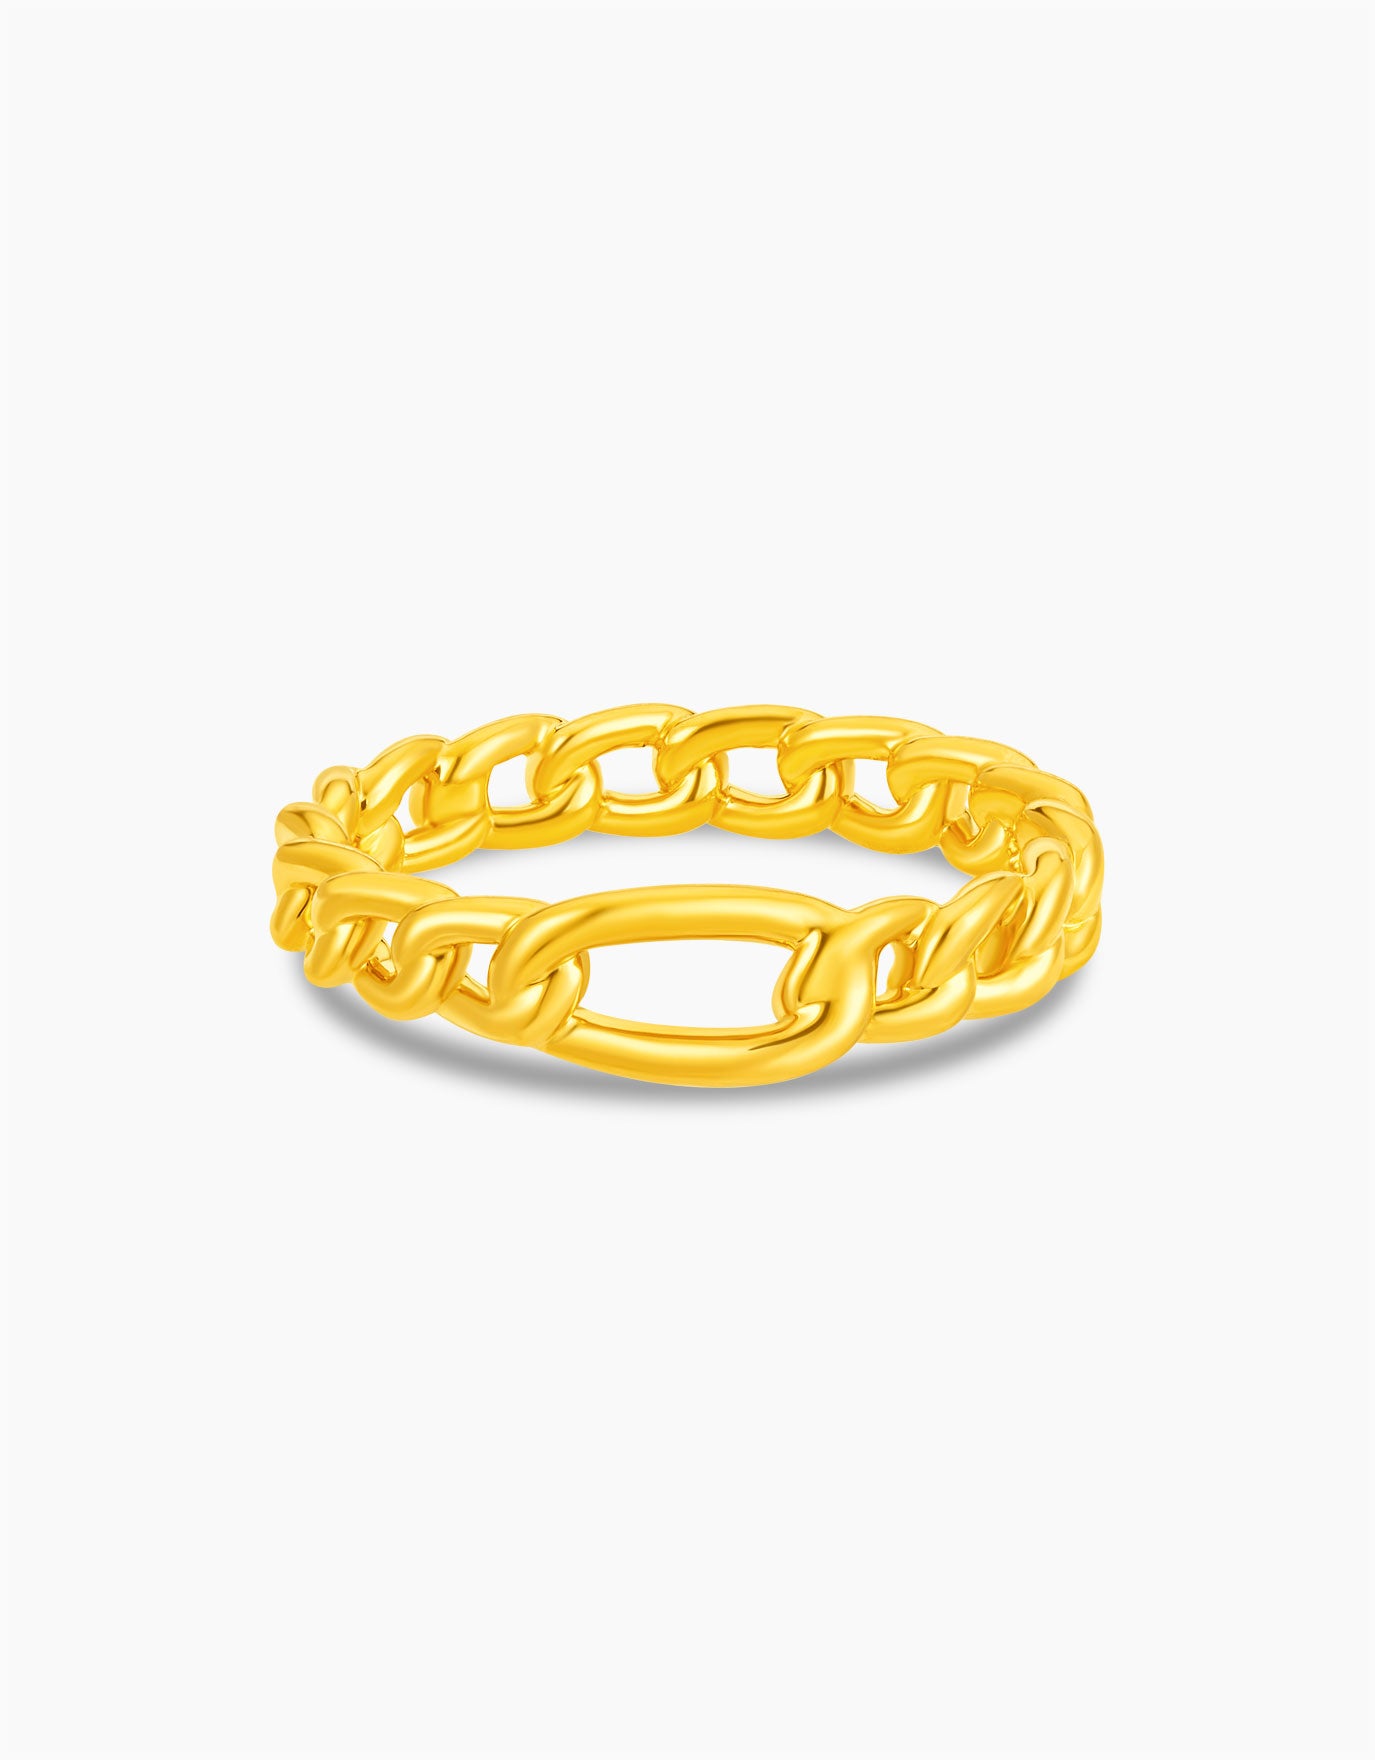 LVC 9IN Arielle 999 Gold Ring